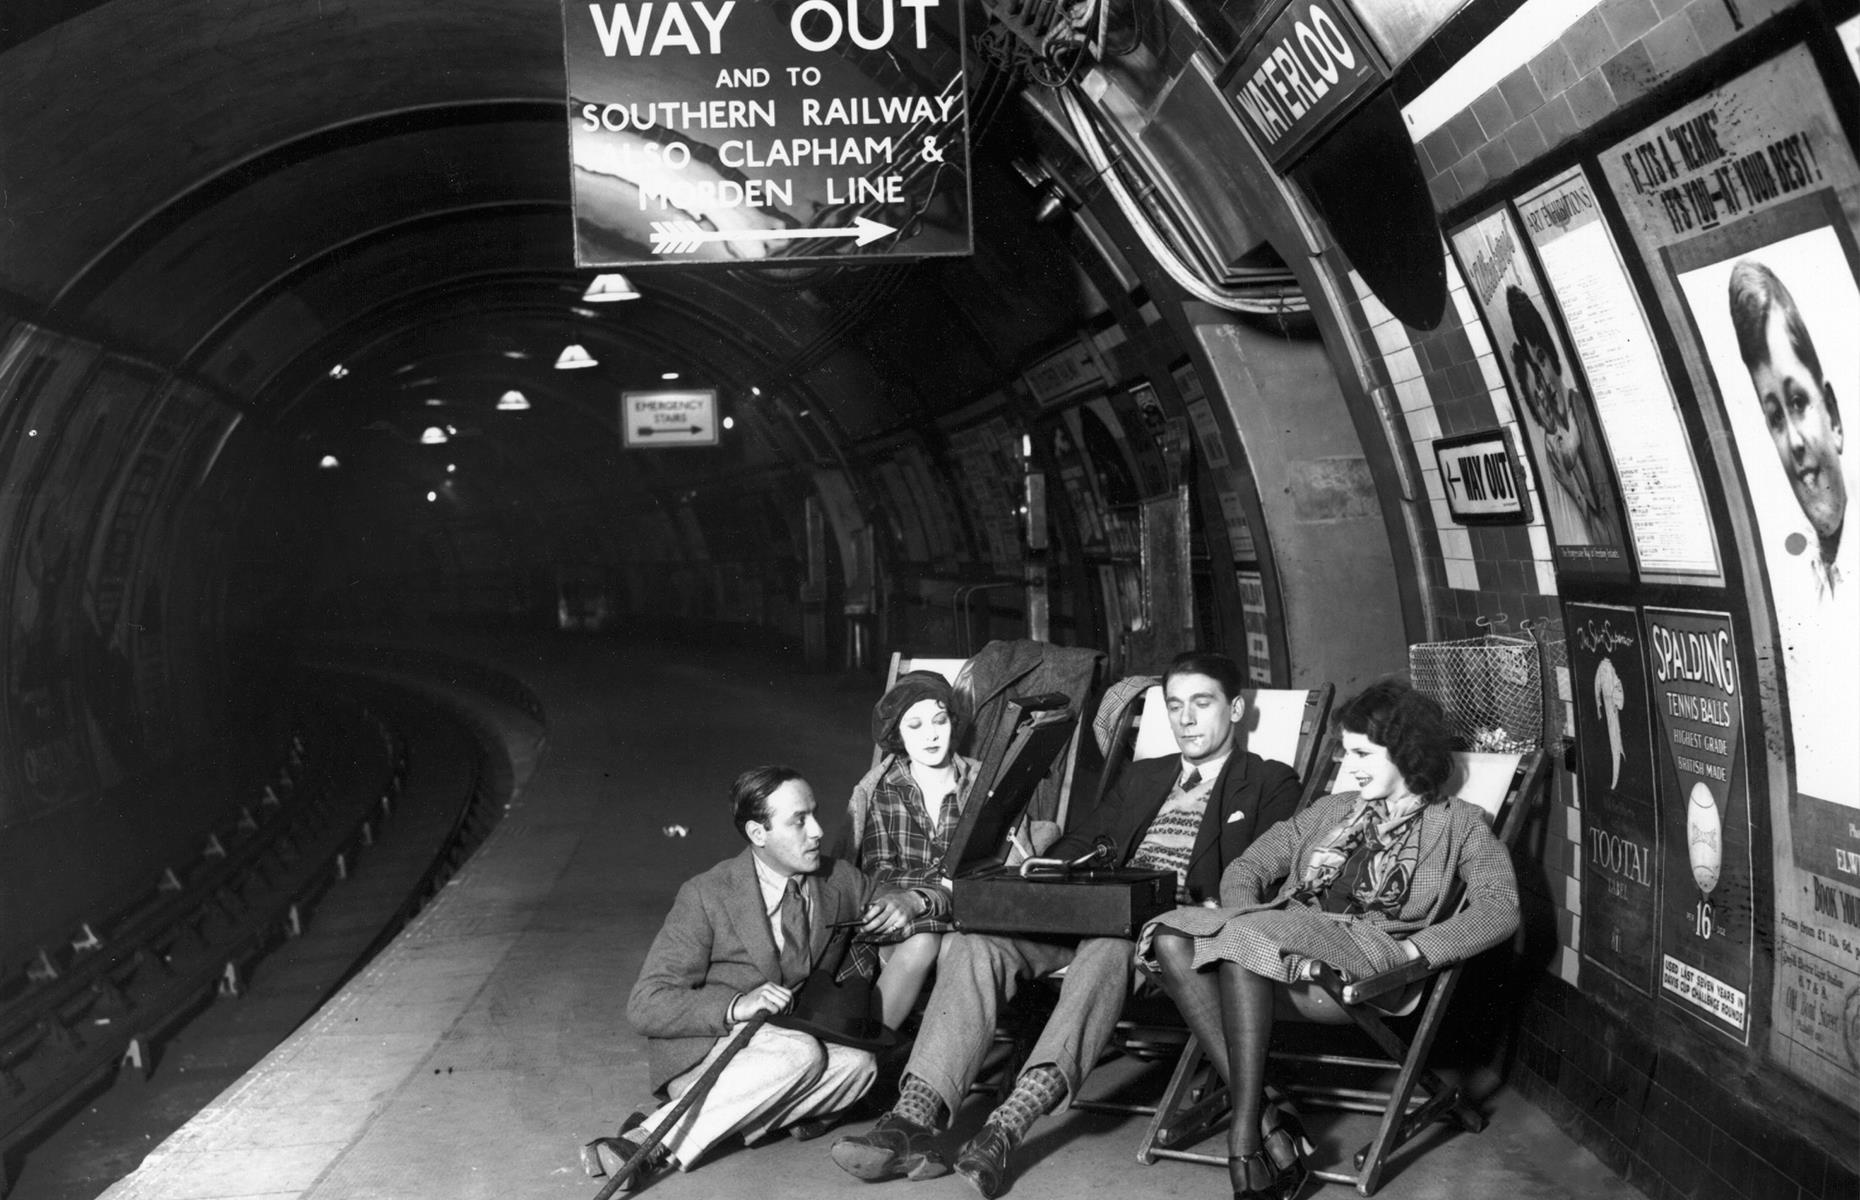 In normal times, London's tube stations are typically packed to the rafters. But it seems there was often a little more elbow room on platforms in the 1920s. Here, in 1928, a group of young people are papped listening to a gramophone on an empty platform at Waterloo underground station.